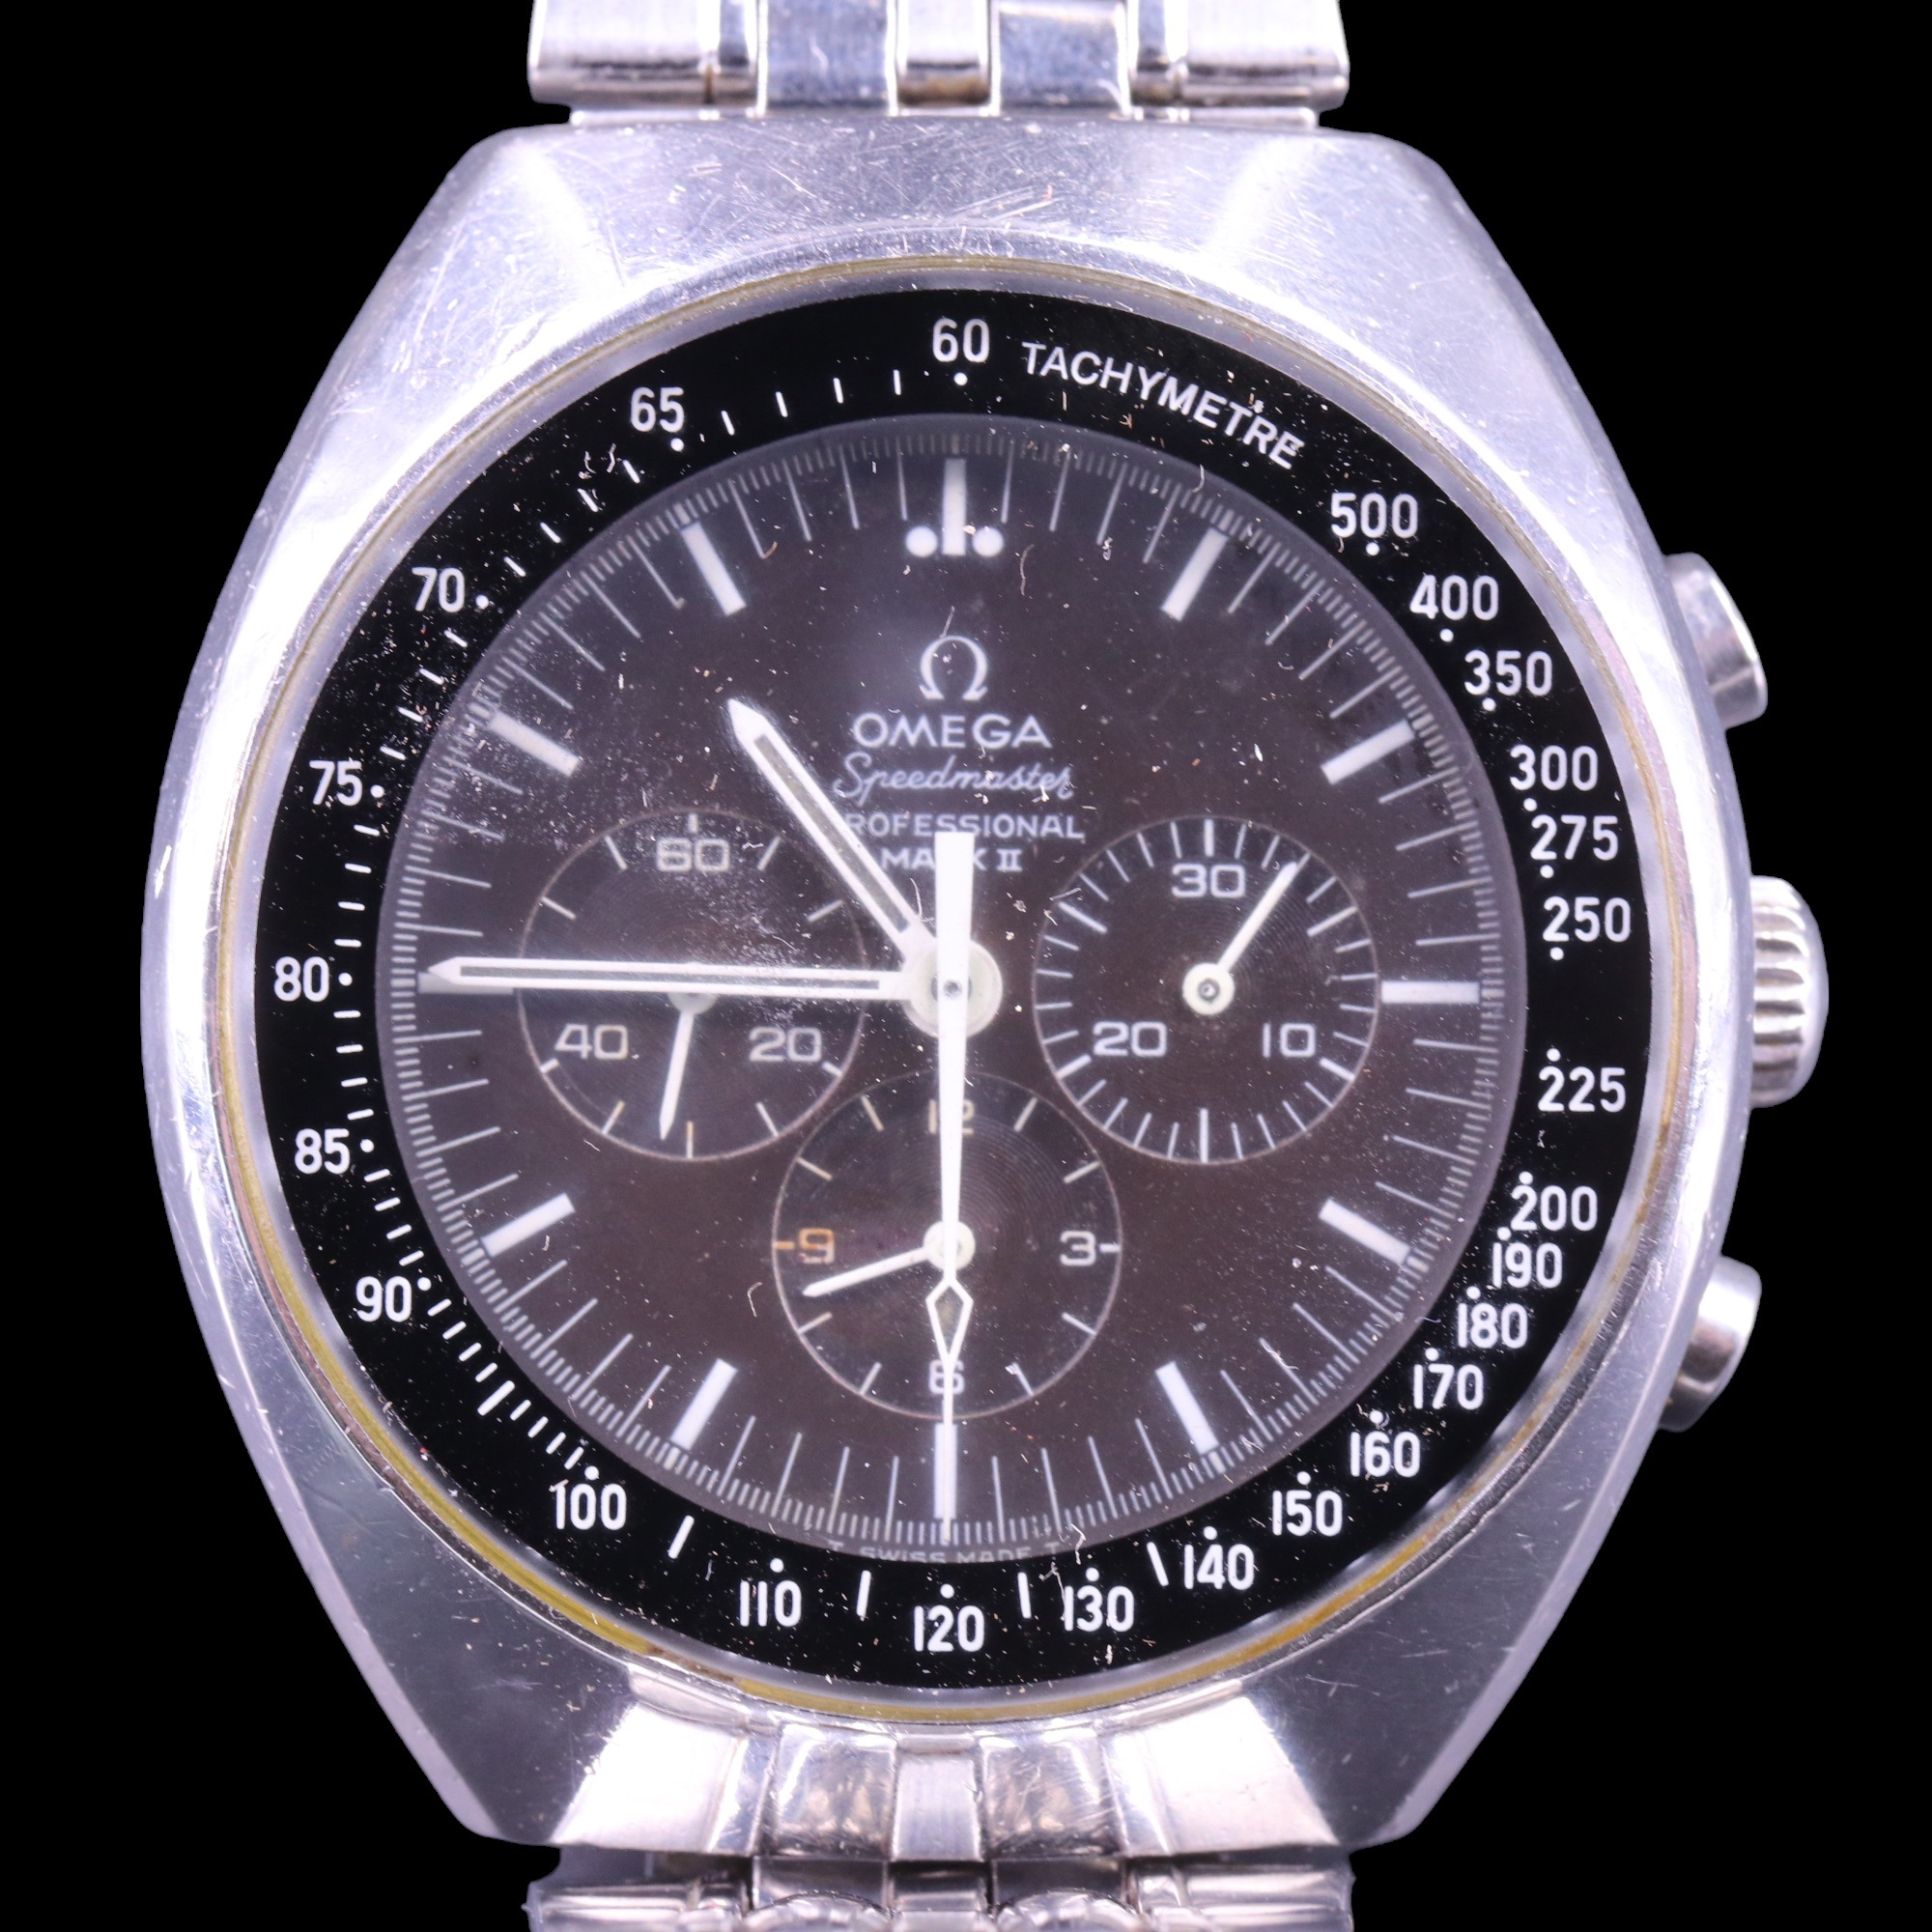 An Omega Speedmaster Professional Mark II stainless steel wristwatch, having a crown-wound calibre